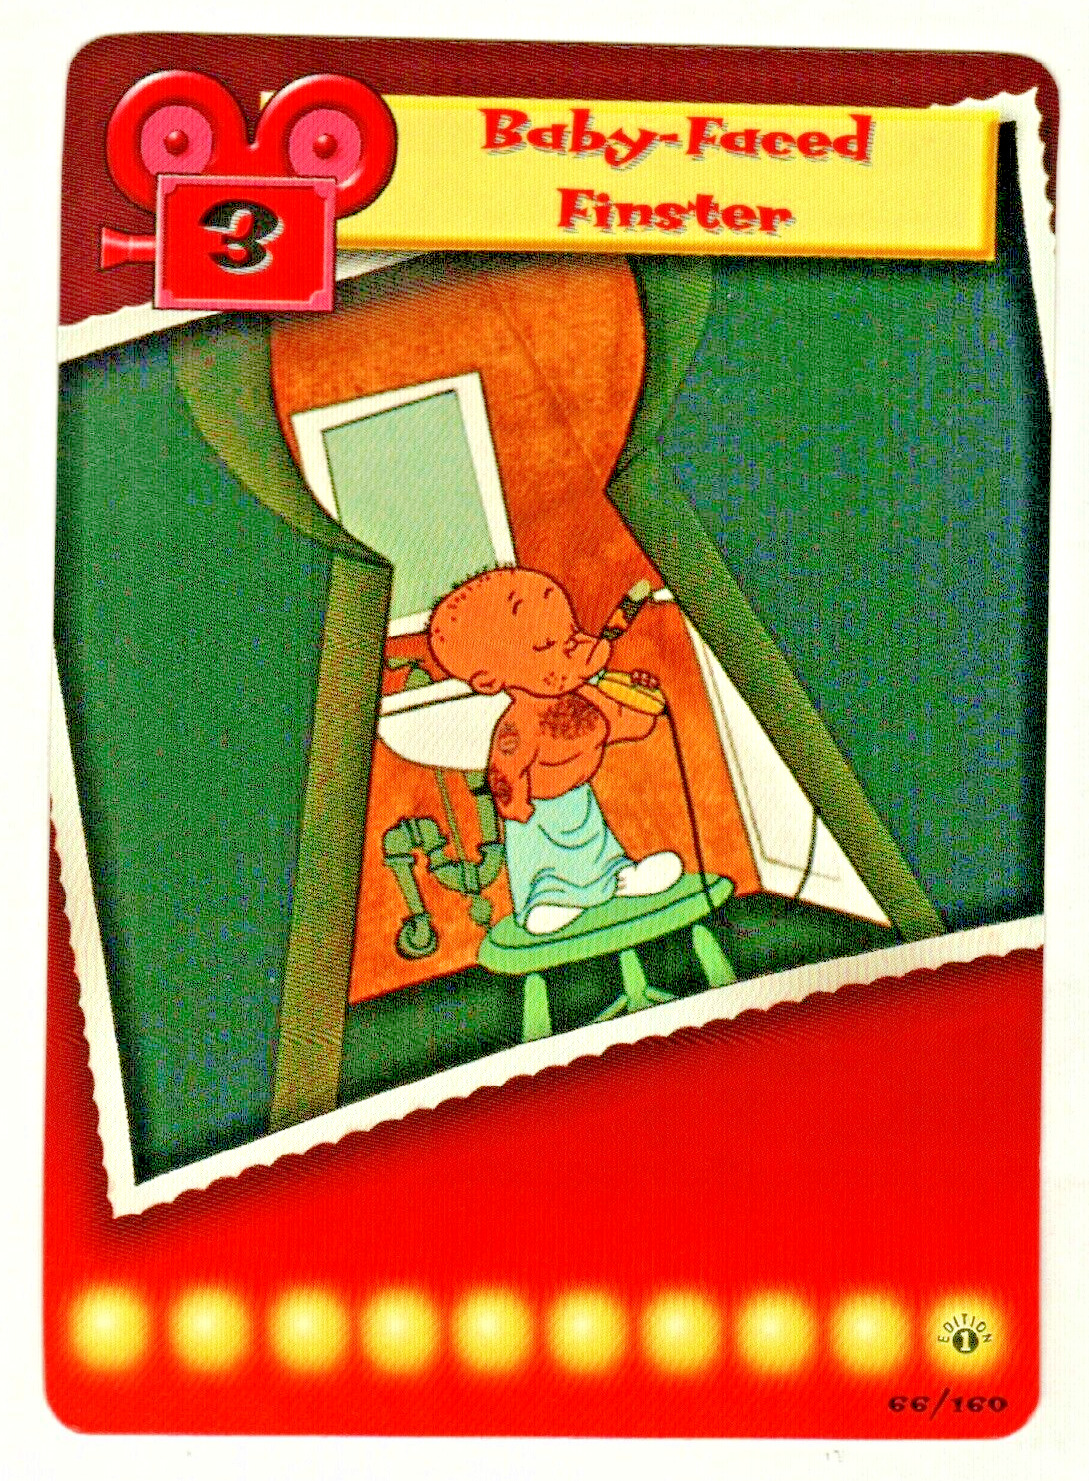 2000 LOONEY TUNES CARDS WOTC SERIES 1 - BABY-FACED FINSTER #66